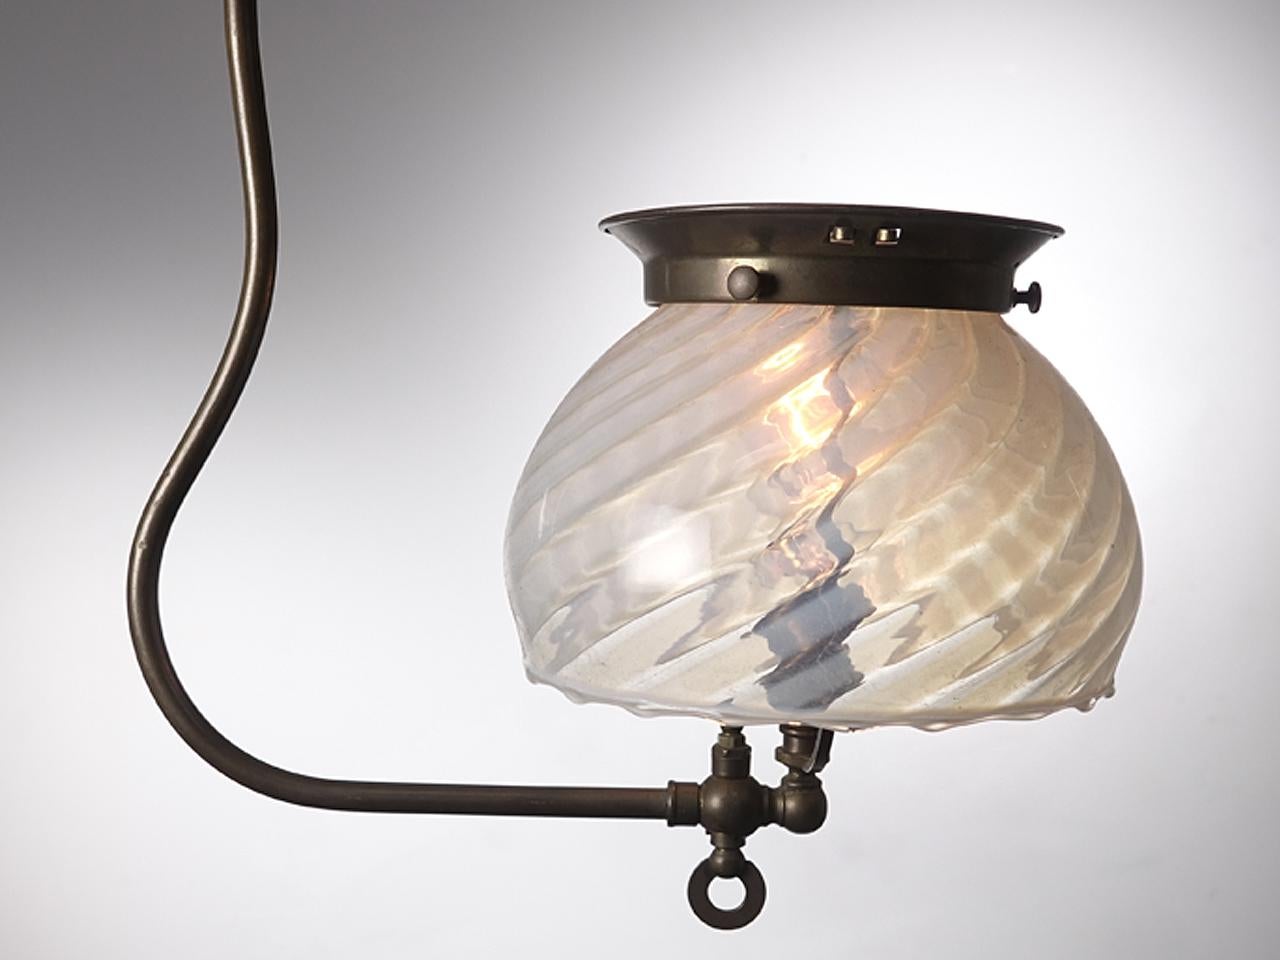 The hand blown 7.5 inch shade on this lamp is just beautiful. The fixture is a simple 1890s gas style that is newly wired to take a single candelabra bulb.